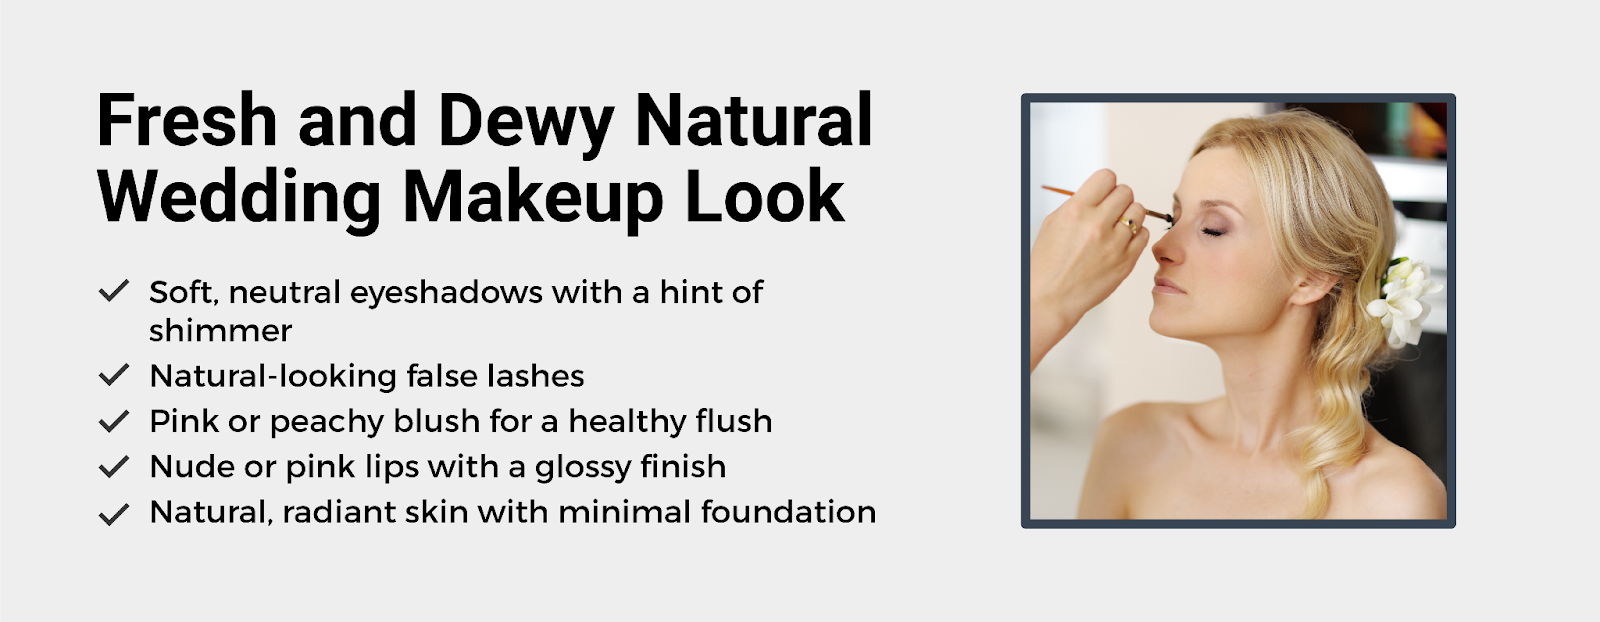 Fresh and dewy natural wedding makeup look